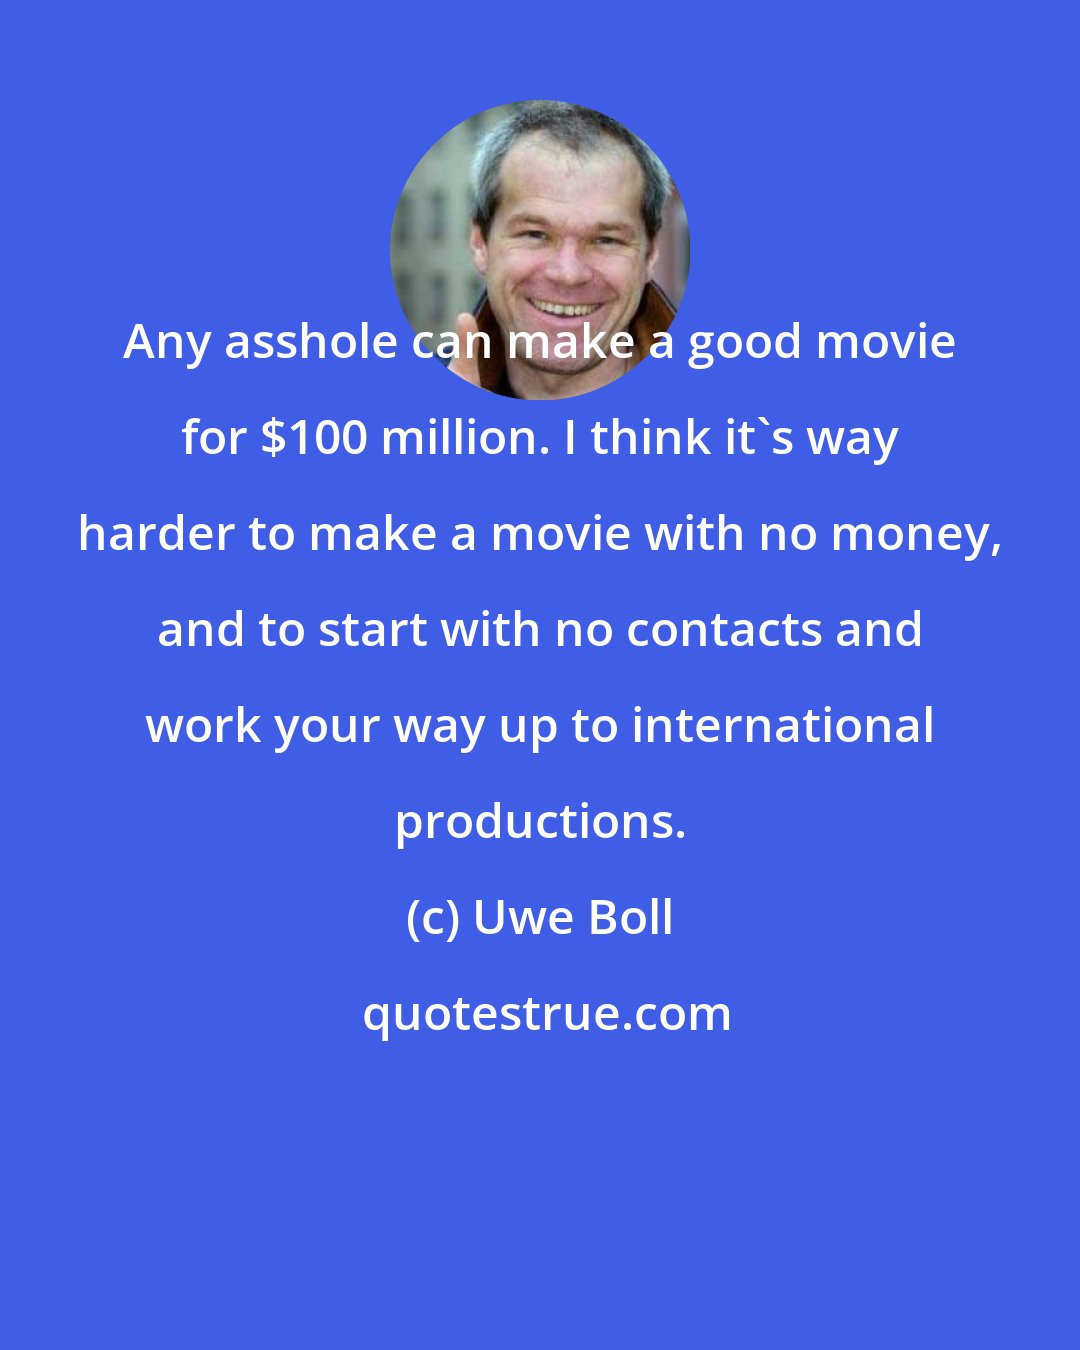 Uwe Boll: Any asshole can make a good movie for $100 million. I think it's way harder to make a movie with no money, and to start with no contacts and work your way up to international productions.